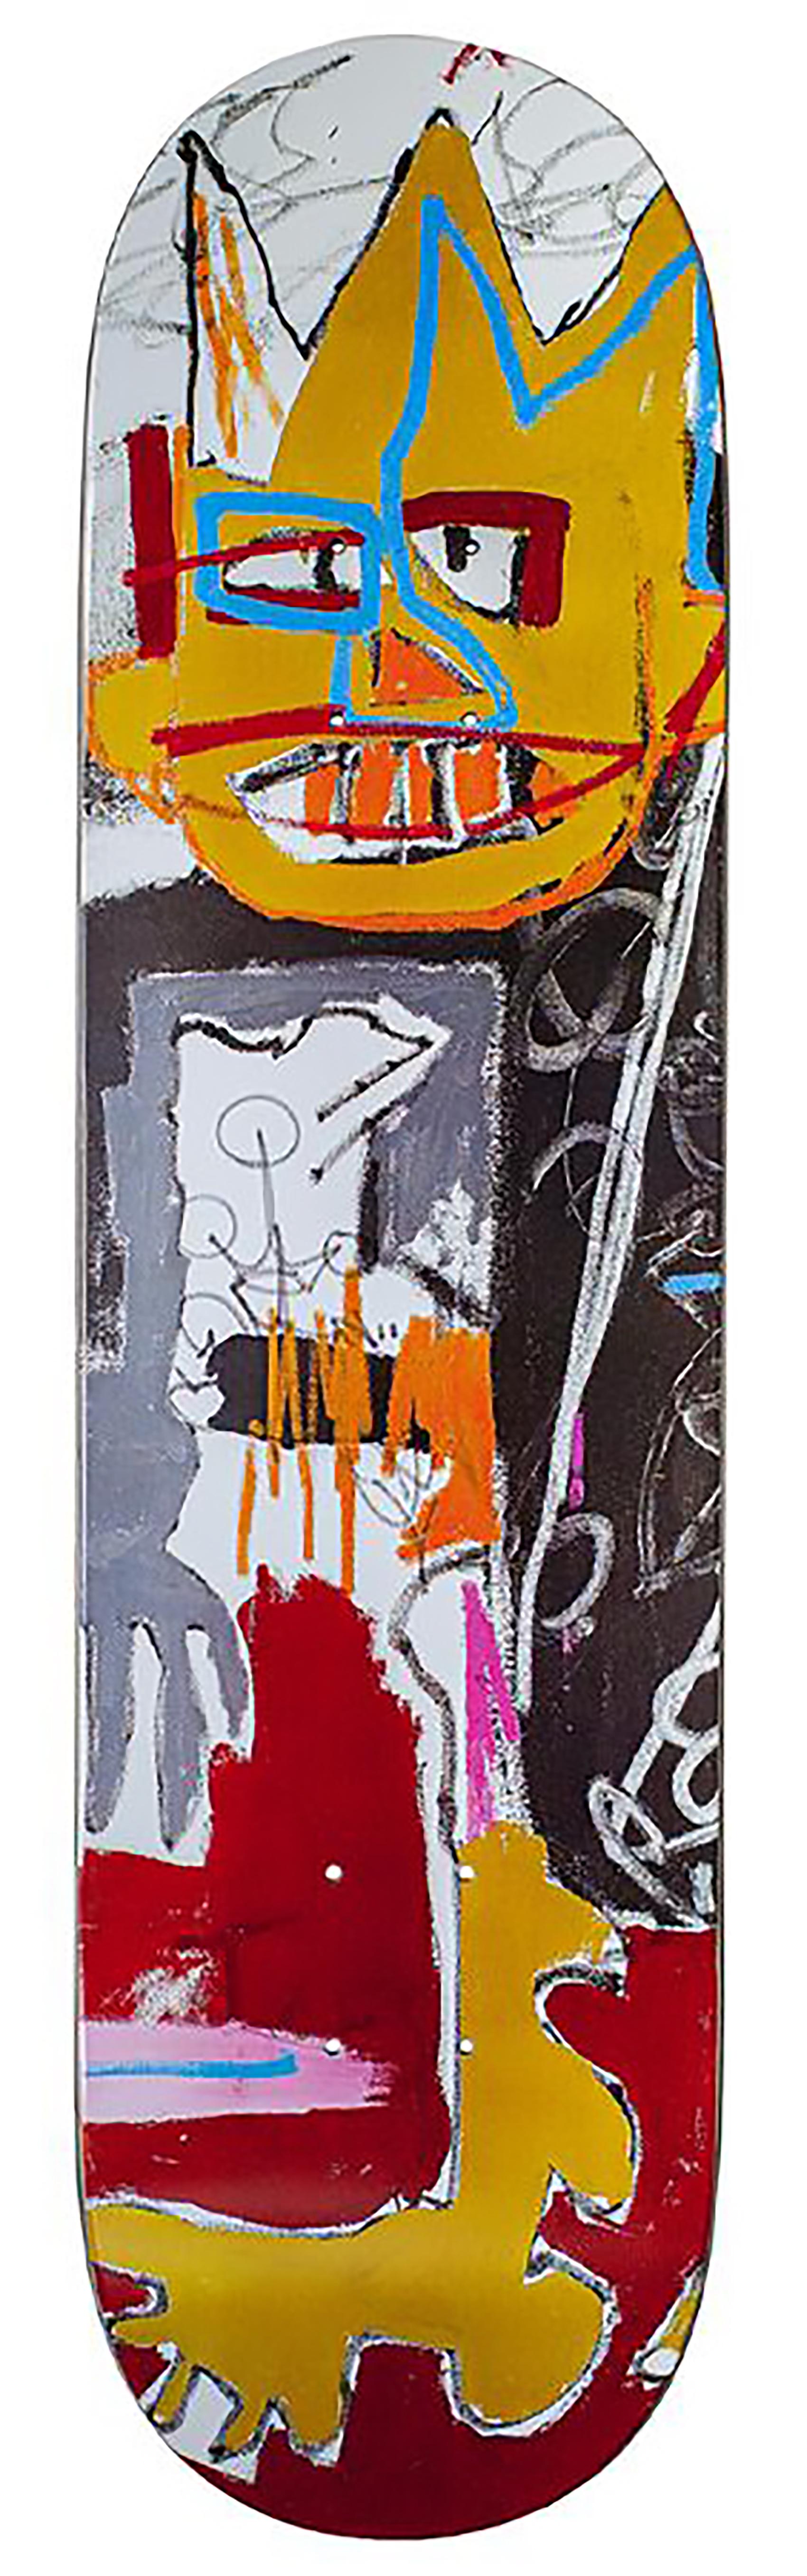 Jean-Michel Basquiat Skateboard Decks 2019-2021 (set of 6 individual works):
A curated set of six Basquiat skateboard decks making for bold, vibrant wall art that hangs with ease; each licensed by the Estate of Jean-Michel Basquiat, featuring